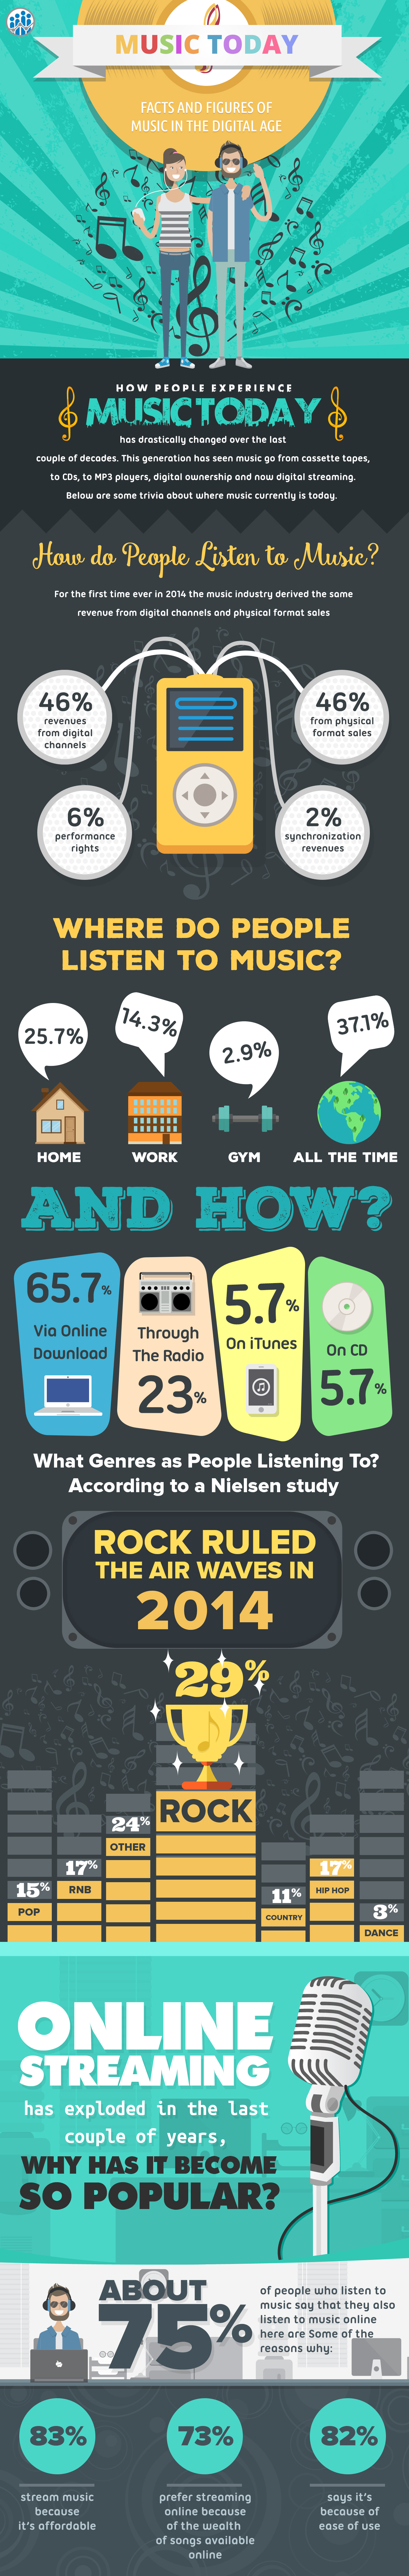 Facts and Figures of Music in the Digital Age